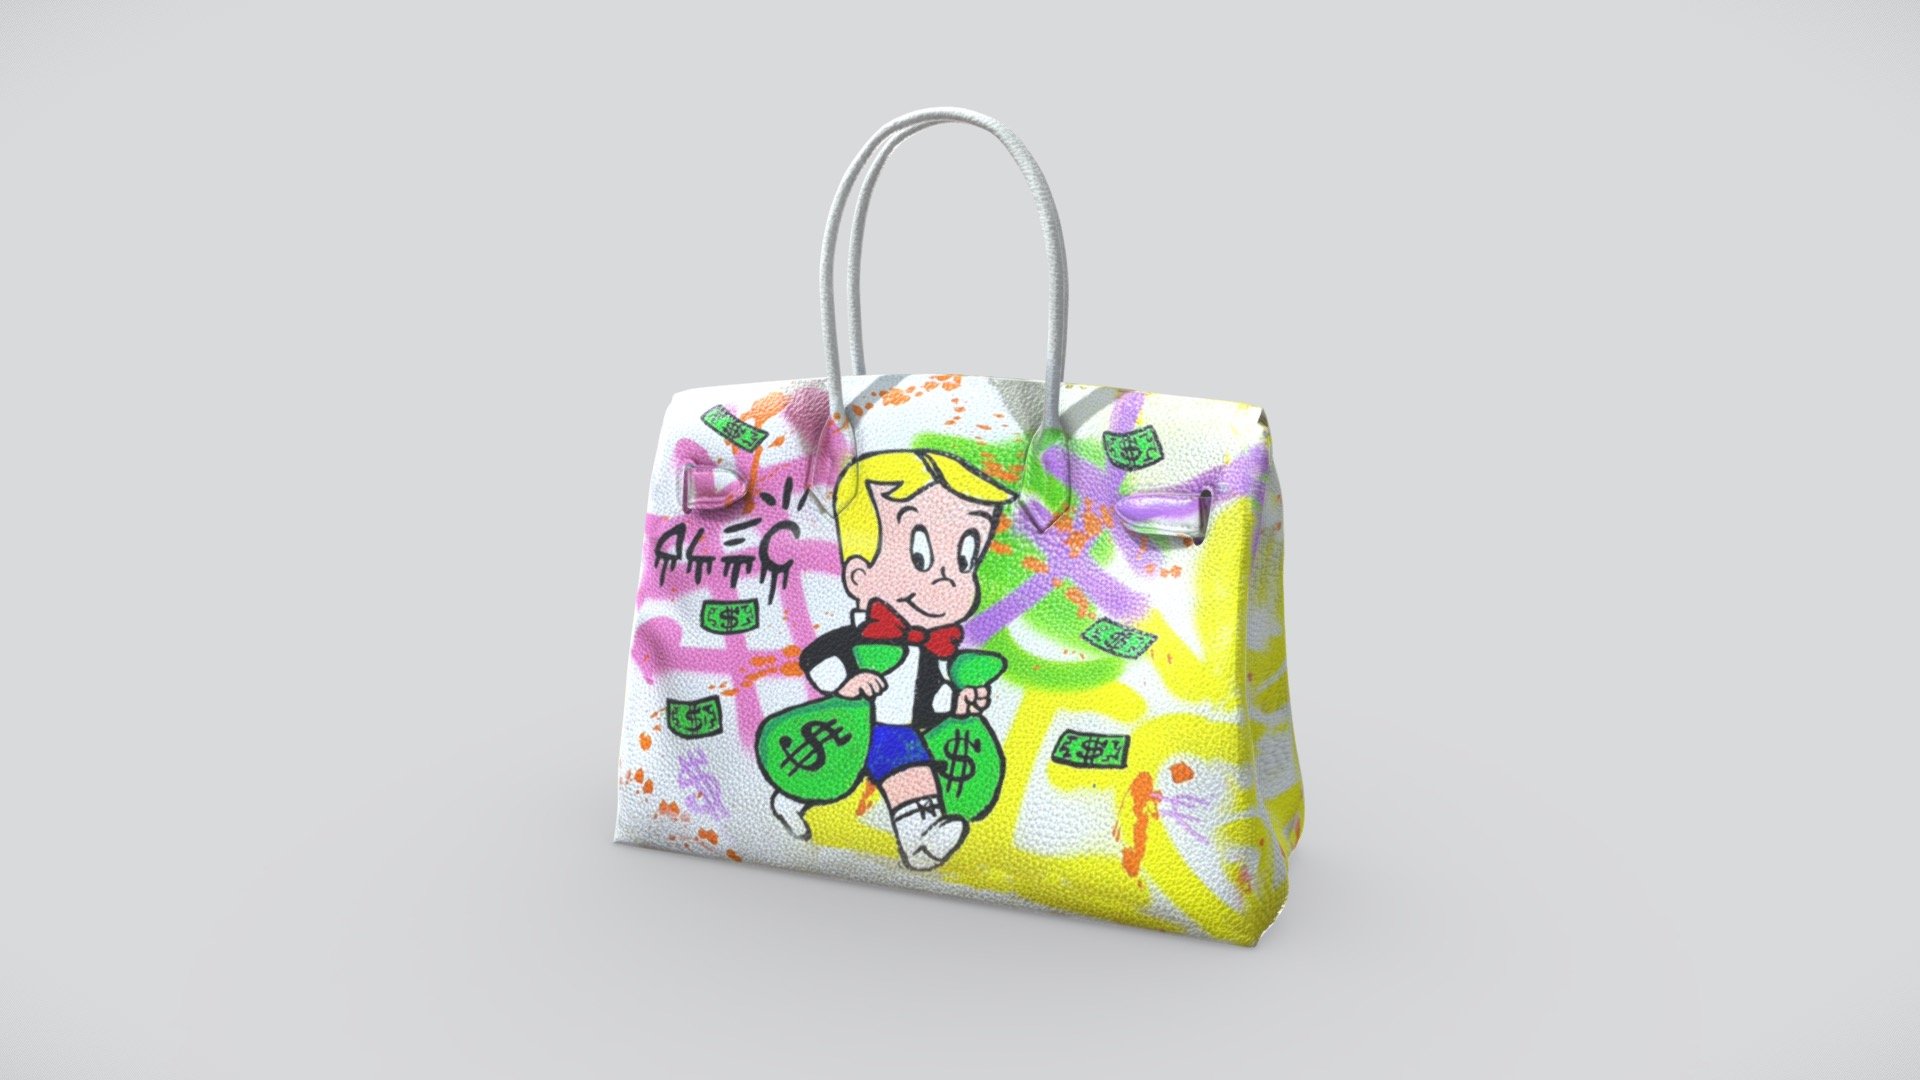 Alec Monopoly X Hermes Bag with prints. 3D model.  This bag was created in Marvelous Desgin. 

Licence: You are free to use this model in any of your projects. Please remember to credit Virtual Rugs and subscribe for more upcoming 3d models coming soon - Alec Monopoly X Hermes Bag - 3D model by virtualrags 3d model